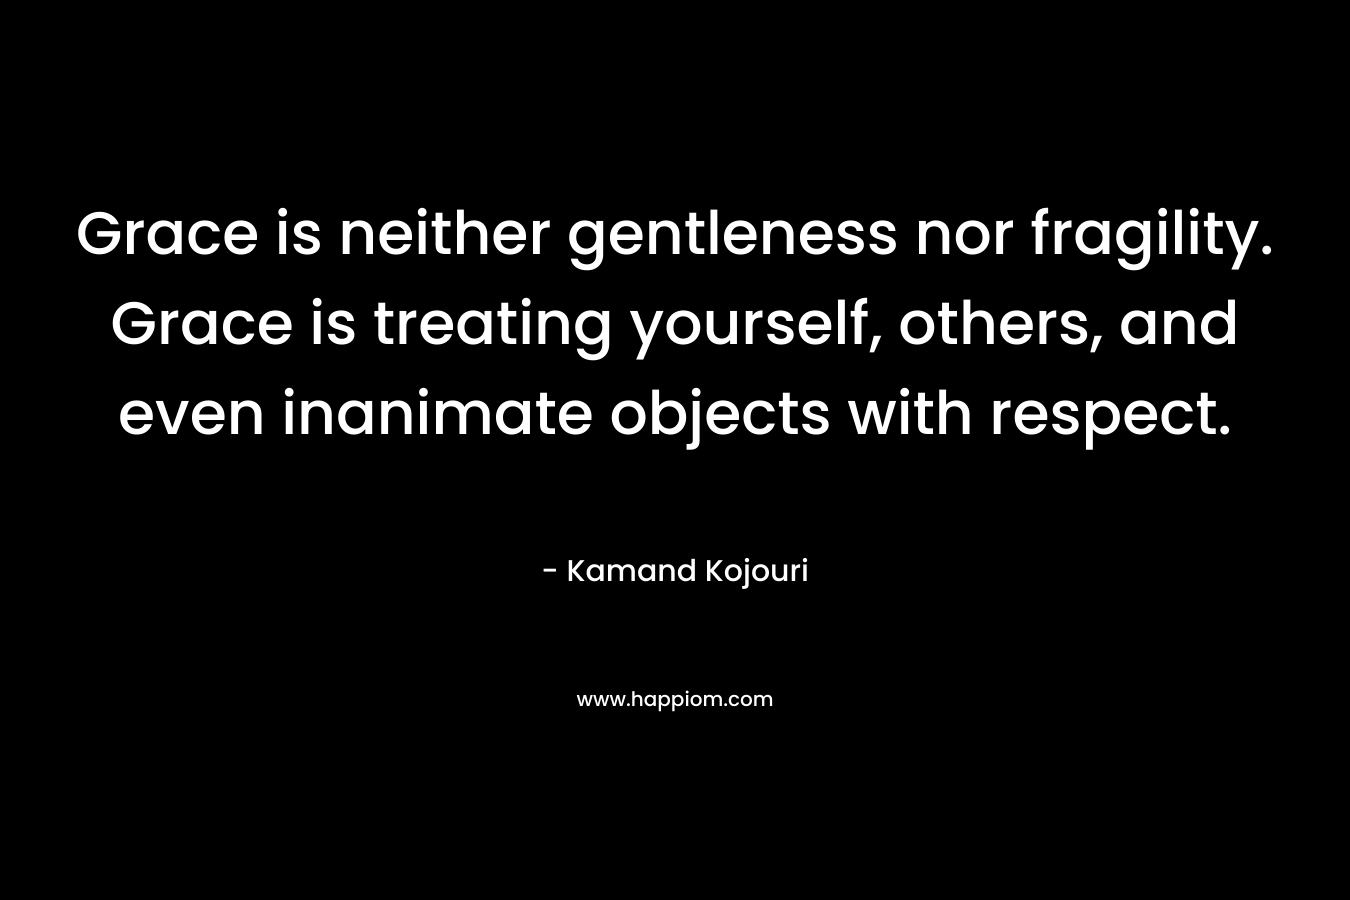 Grace is neither gentleness nor fragility. Grace is treating yourself, others, and even inanimate objects with respect. – Kamand Kojouri